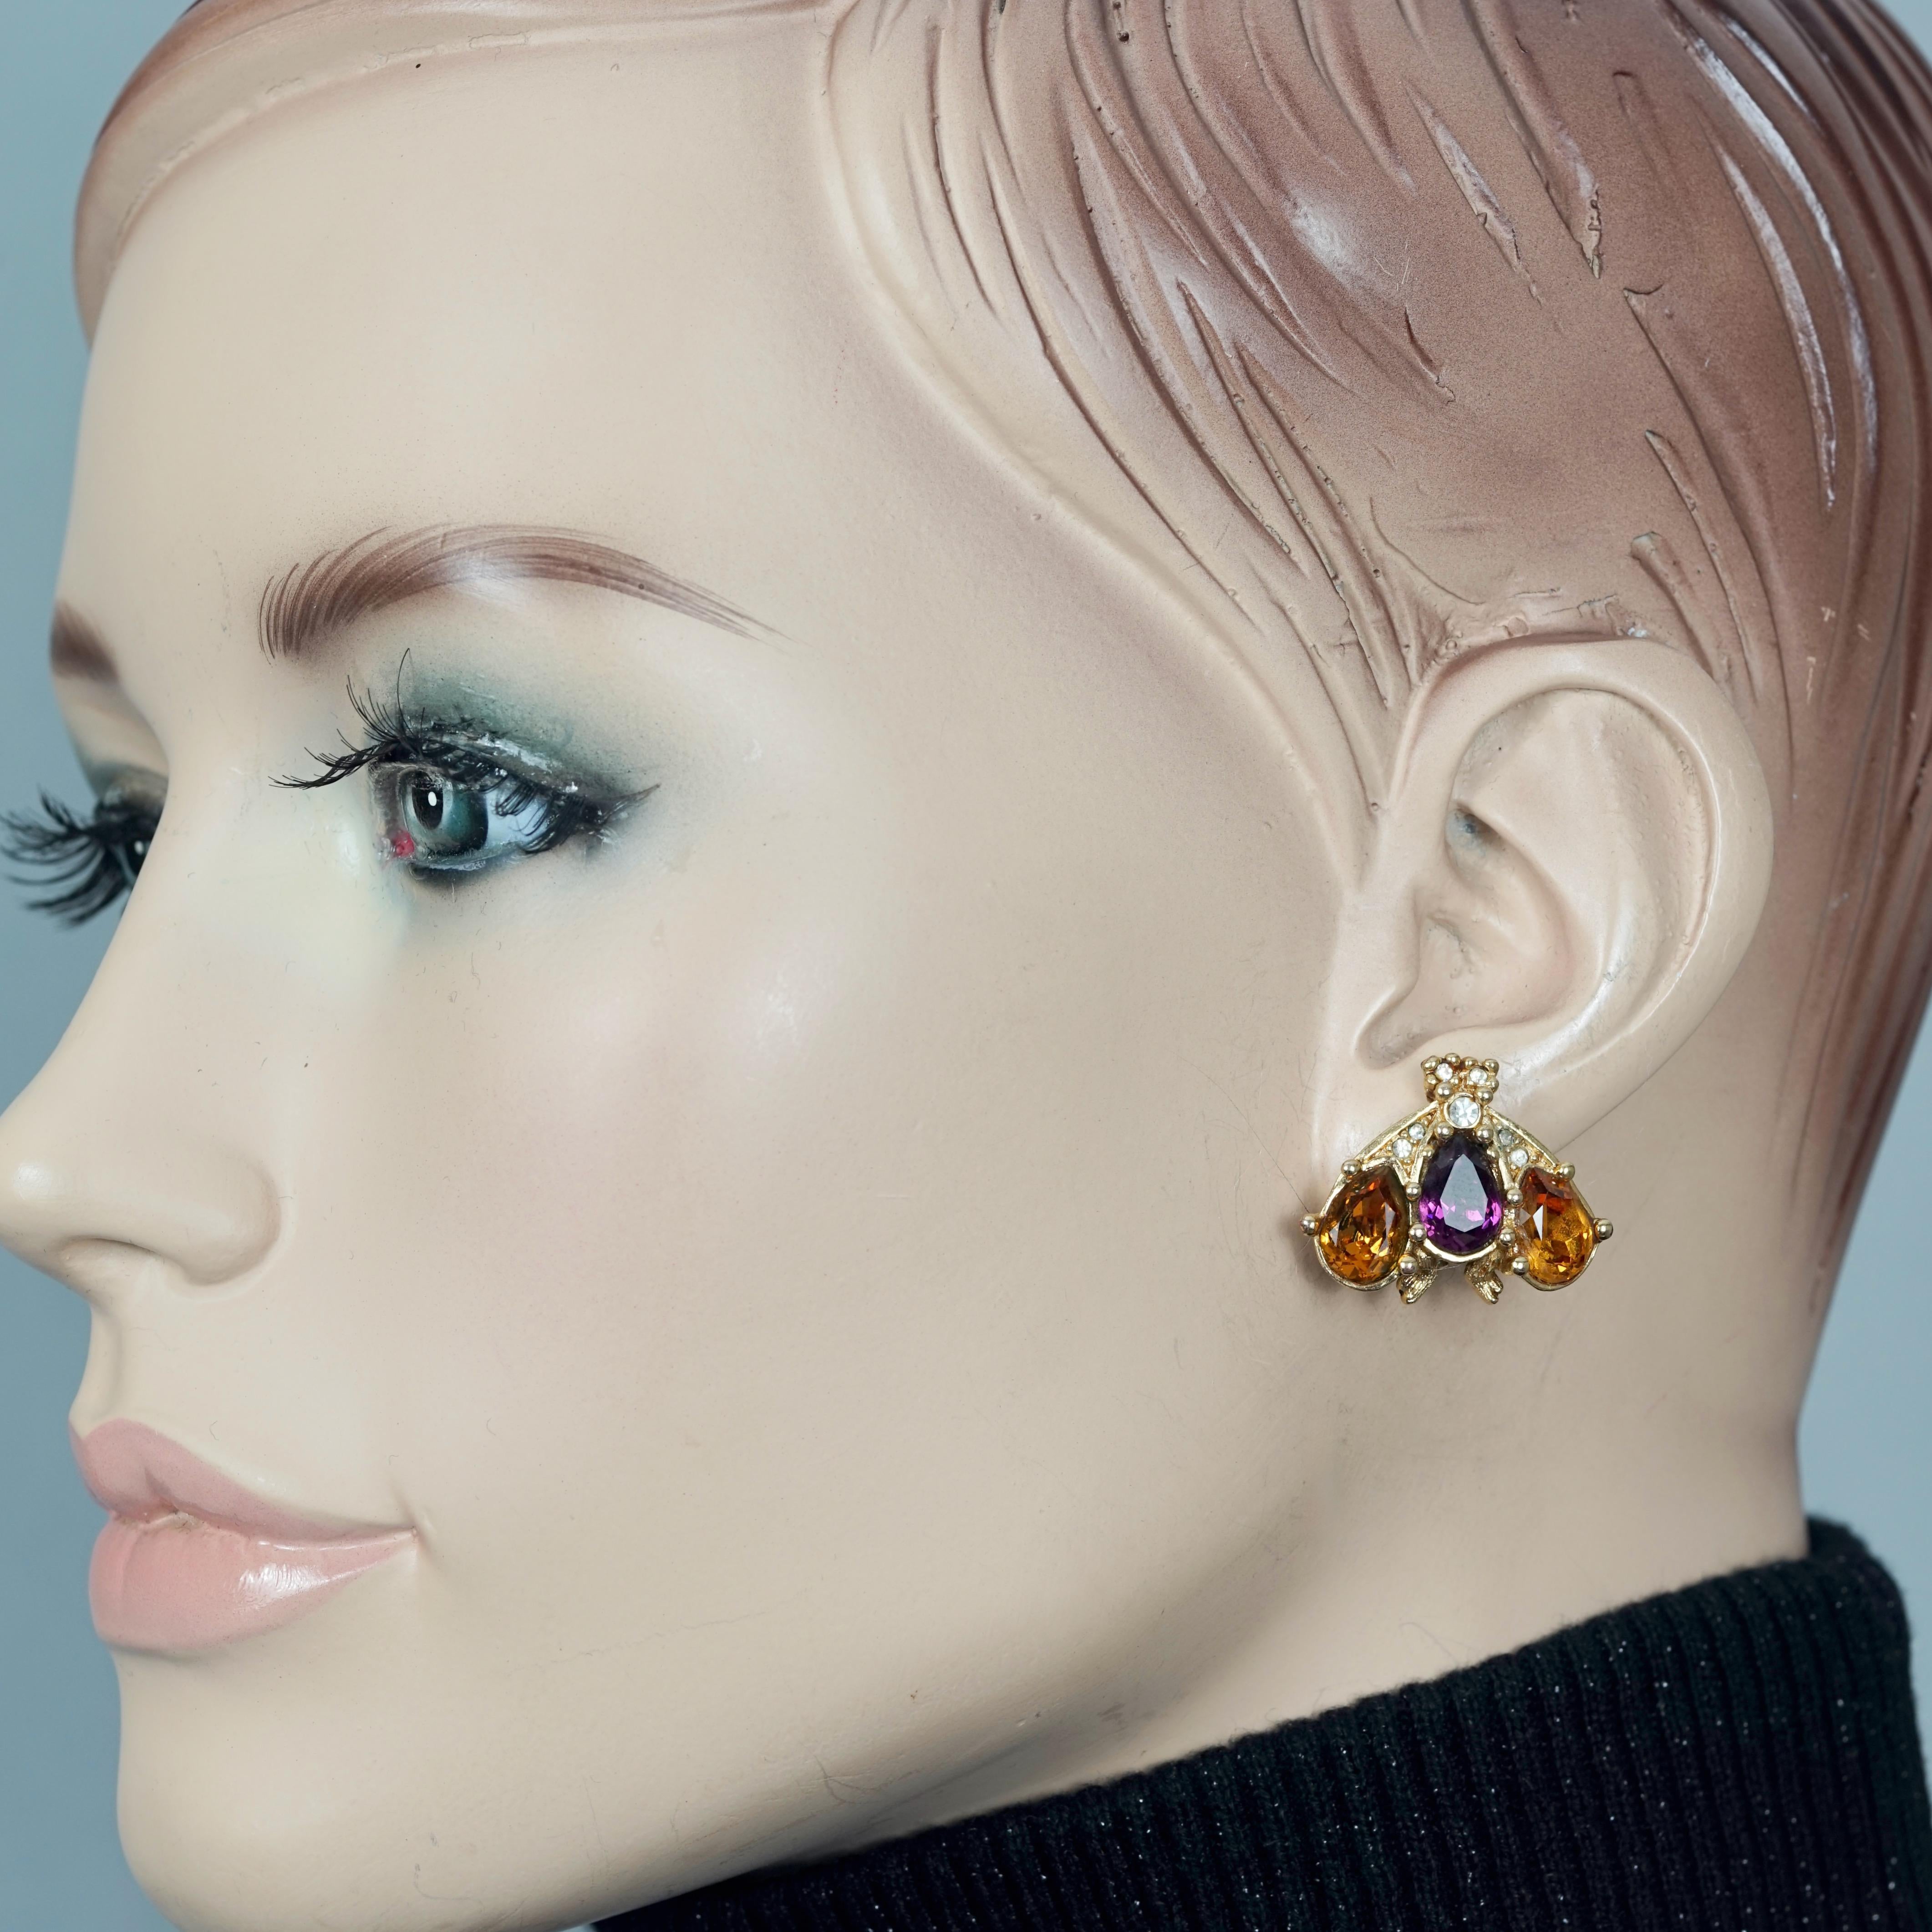 Vintage CHRISTIAN DIOR Jewelled Bumble Bee Earrings

Measurements:
Height: 0.82 inch (2.1 cm) 
Width: 1.02 inches (2.6 cm)
Weight per Earring: 7 grams

Features:
- 100% Authentic CHRISTIAN DIOR Limited Edition.
- Jewelled bumble bee earrings.
-